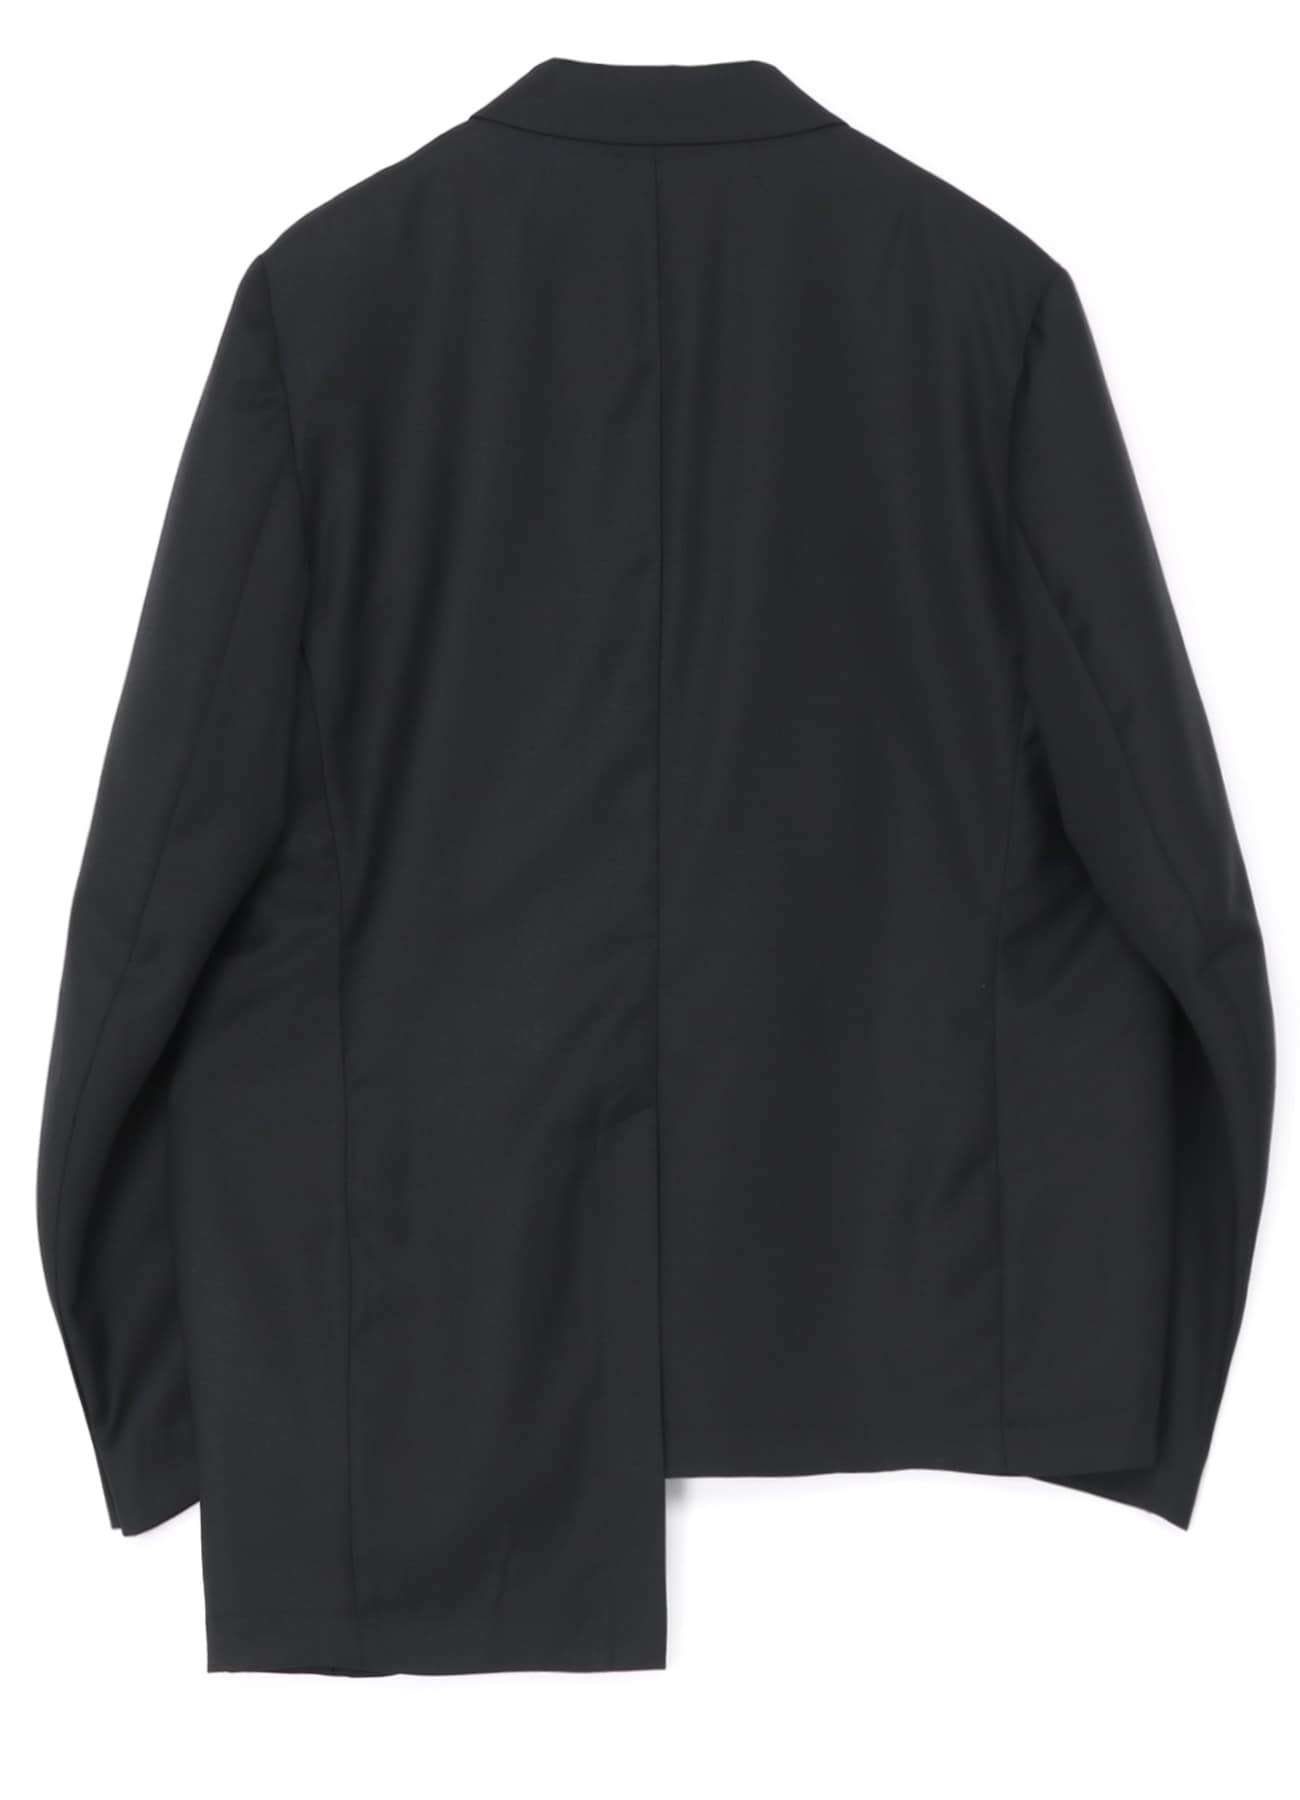 T/W GABARDINE JACKET WITH DOUBLE-TAILORED LEFT FRONT(M Black): S 